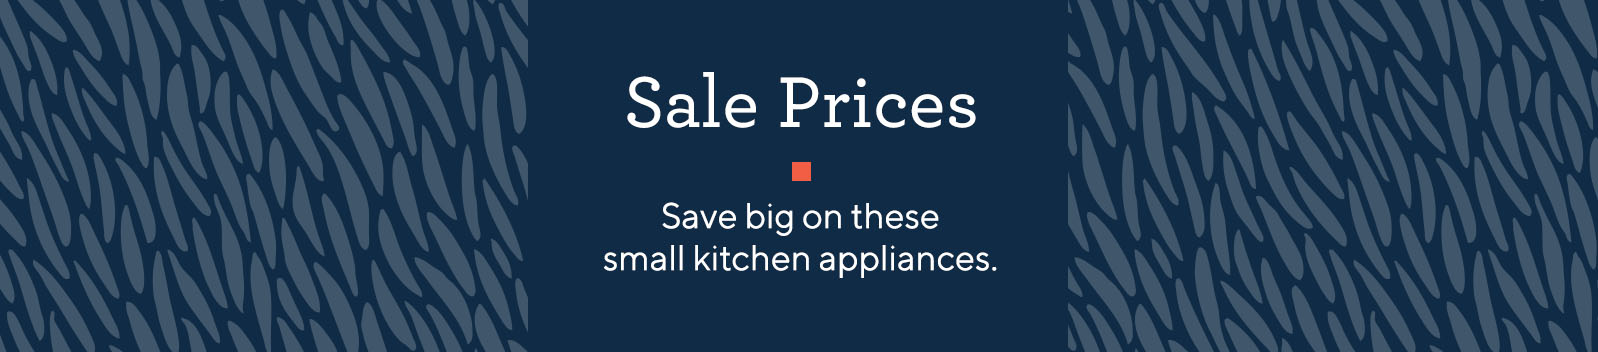 Sale Prices  Subhead: Save big on these small kitchen appliances.